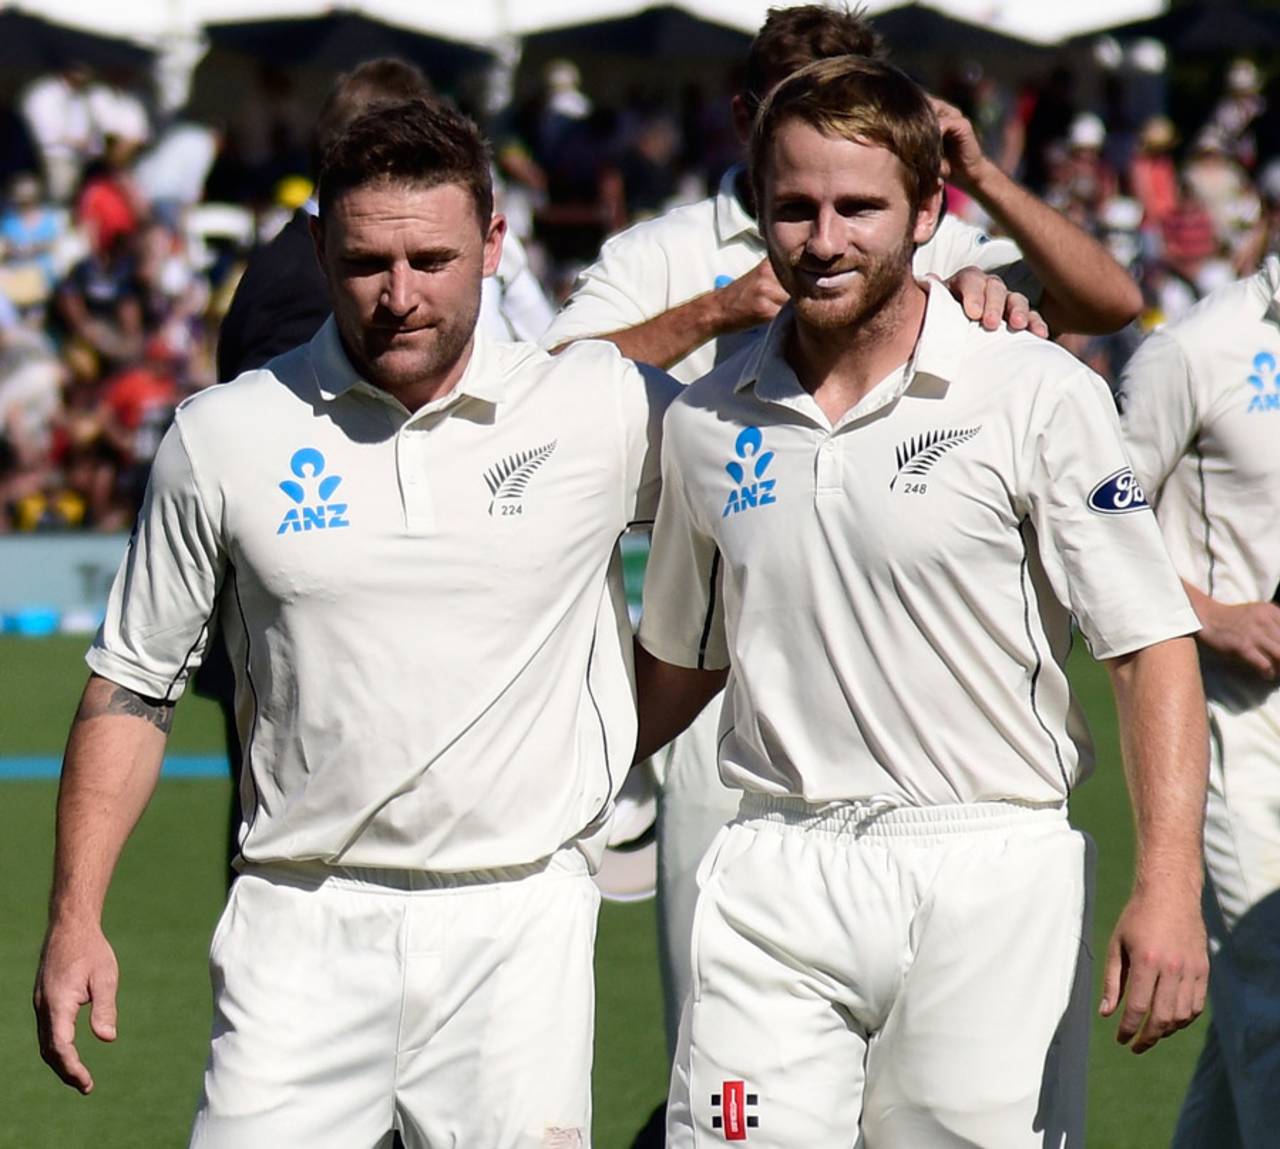 Brendon McCullum and Kane Williamson walk off after the national anthems, New Zealand v Australia, 2nd Test, Christchurch, 1st day, February 20, 2016